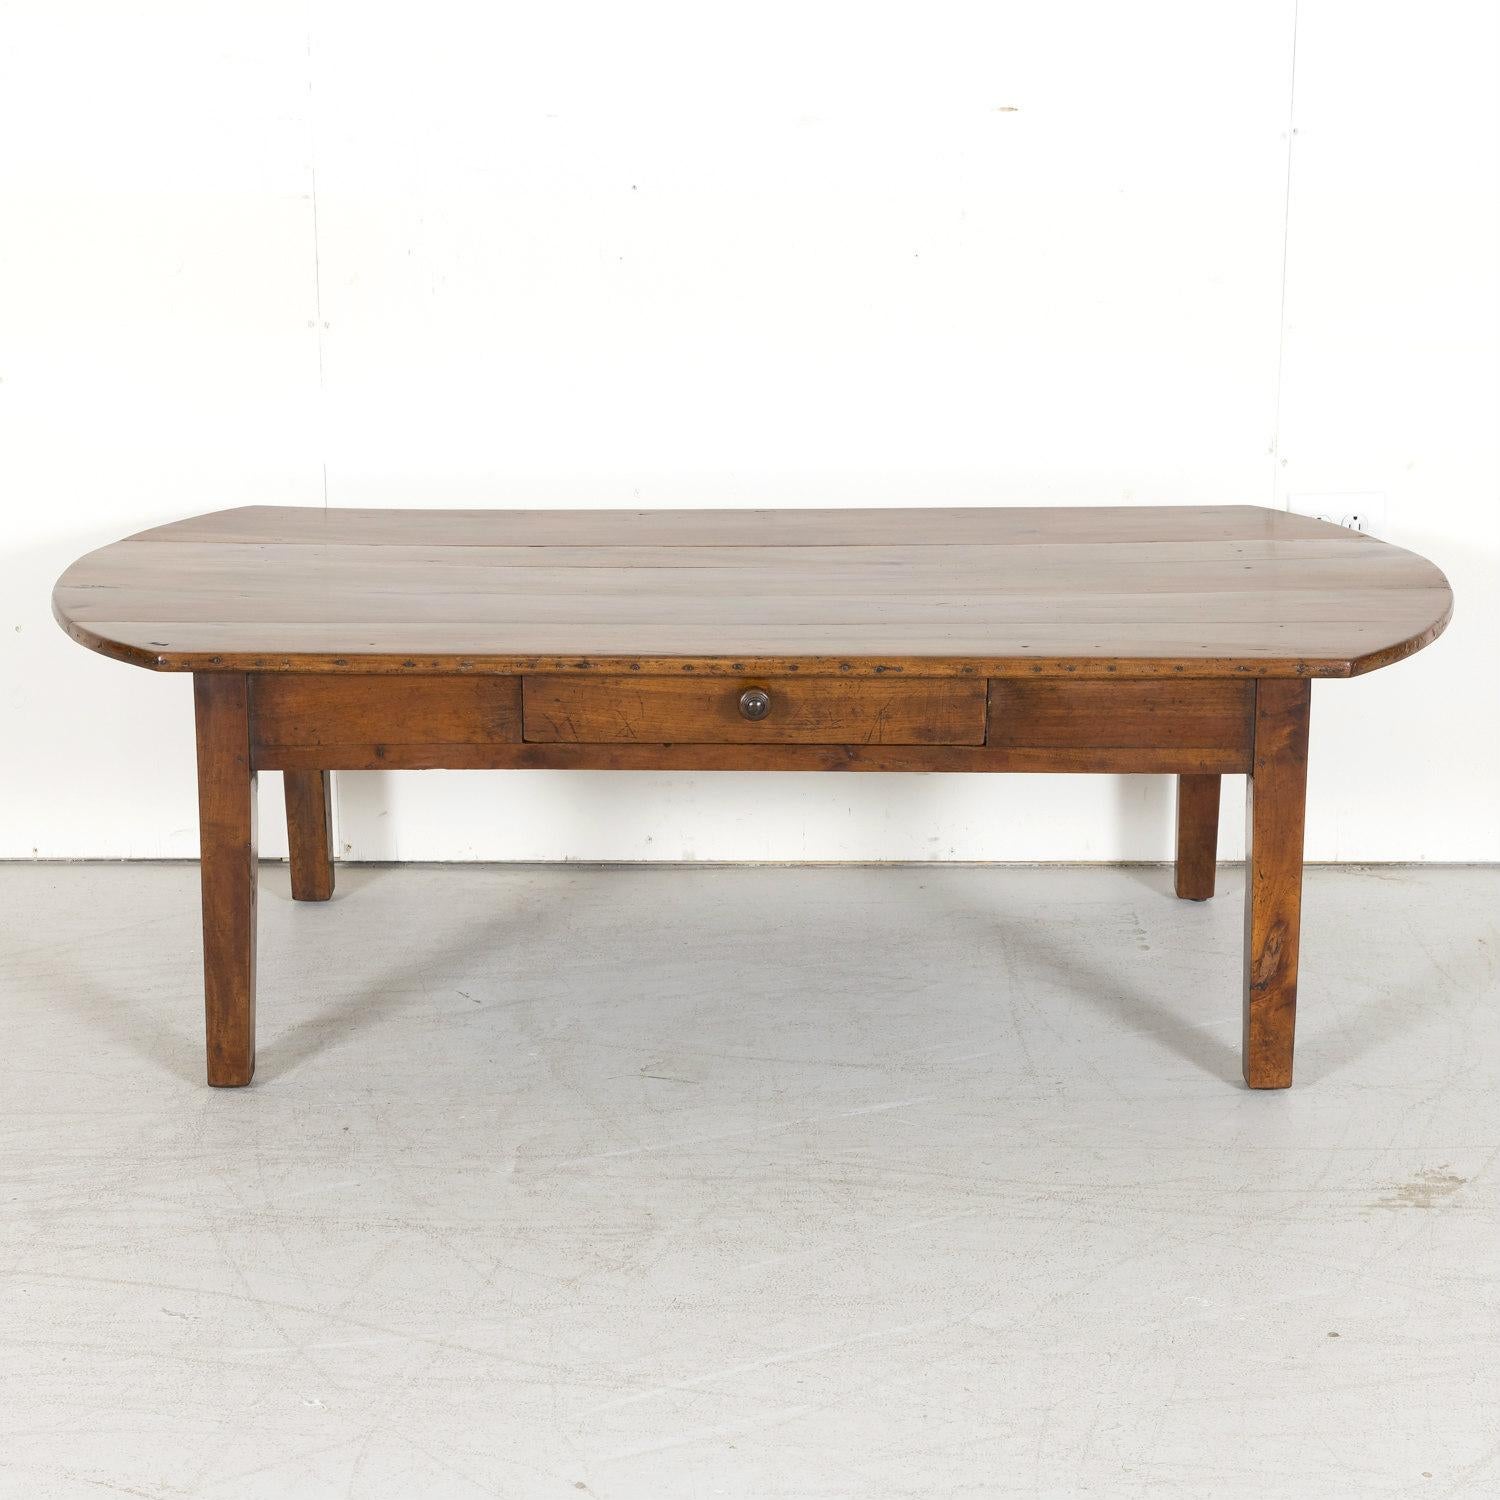 Late 19th Century 19th Century Country French Solid Cherry Oval Coffee Table with Drawer